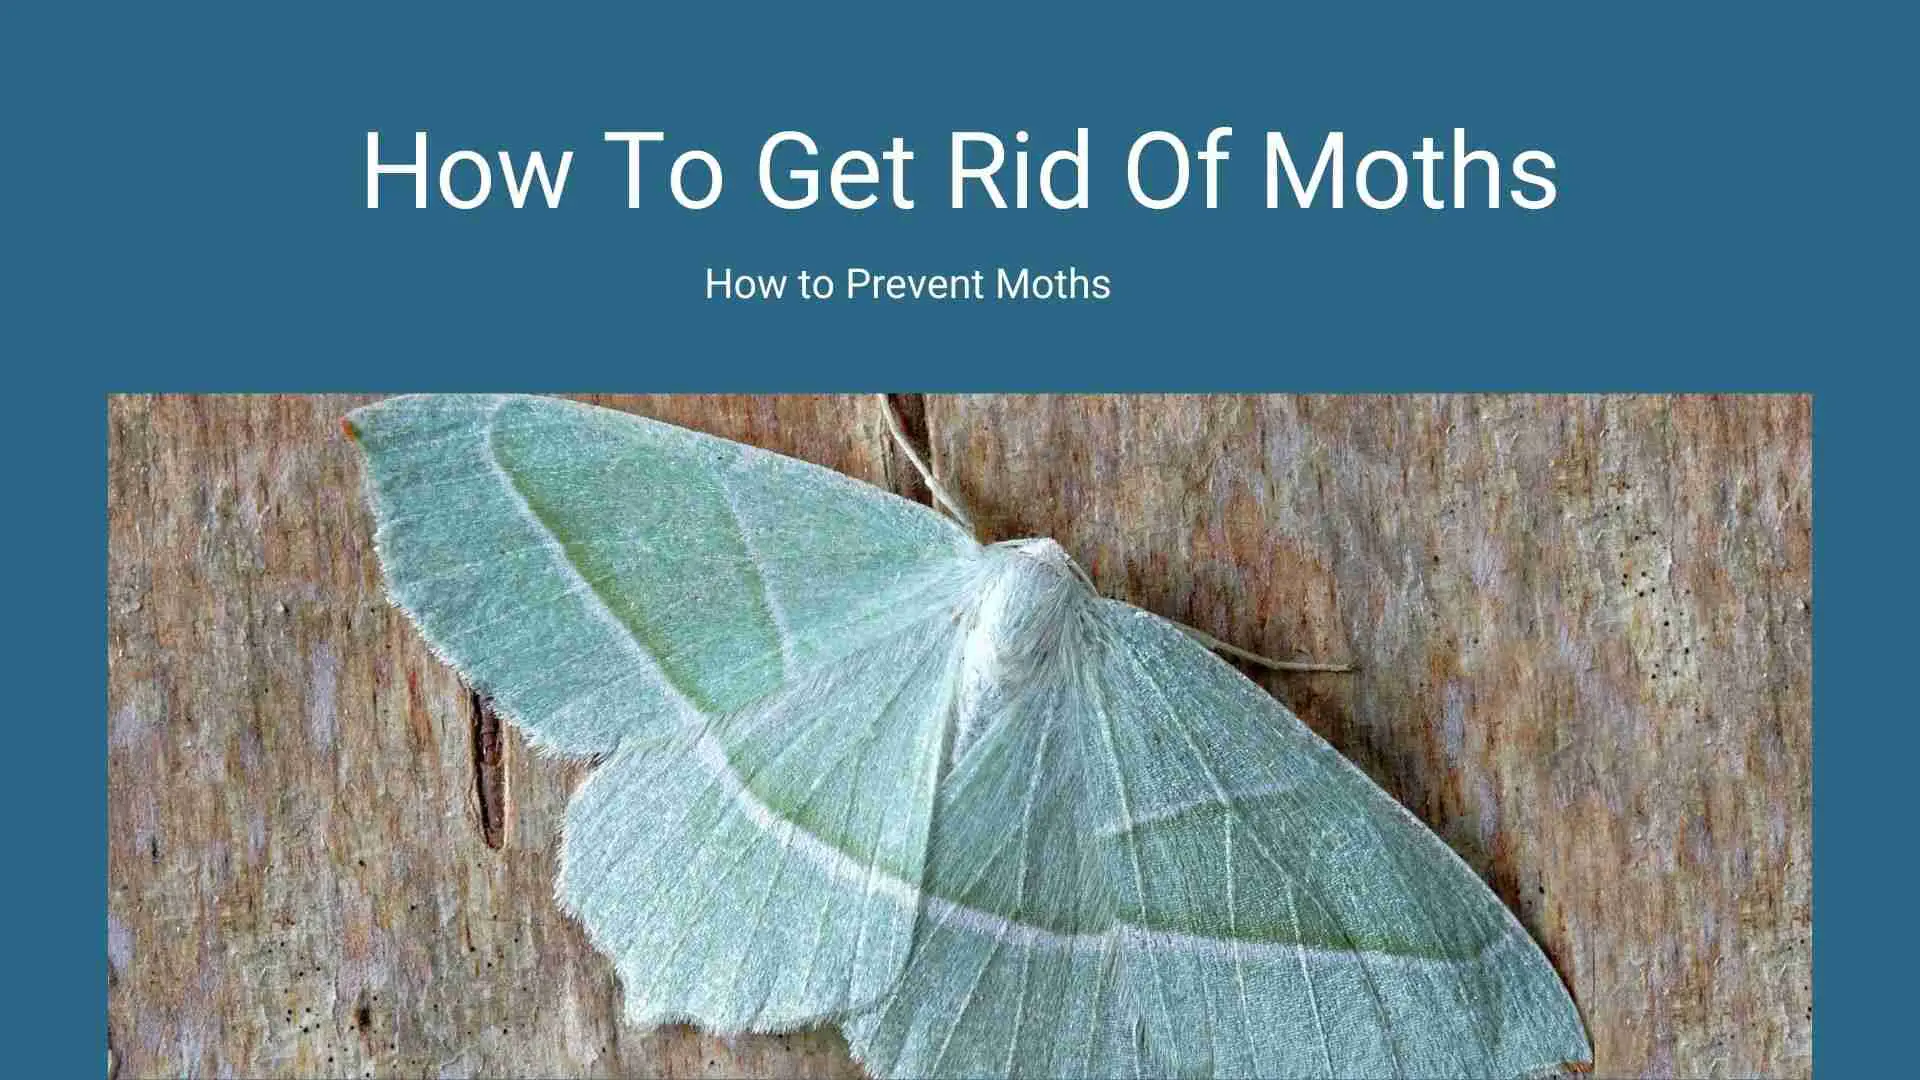 How to get rid of Moths